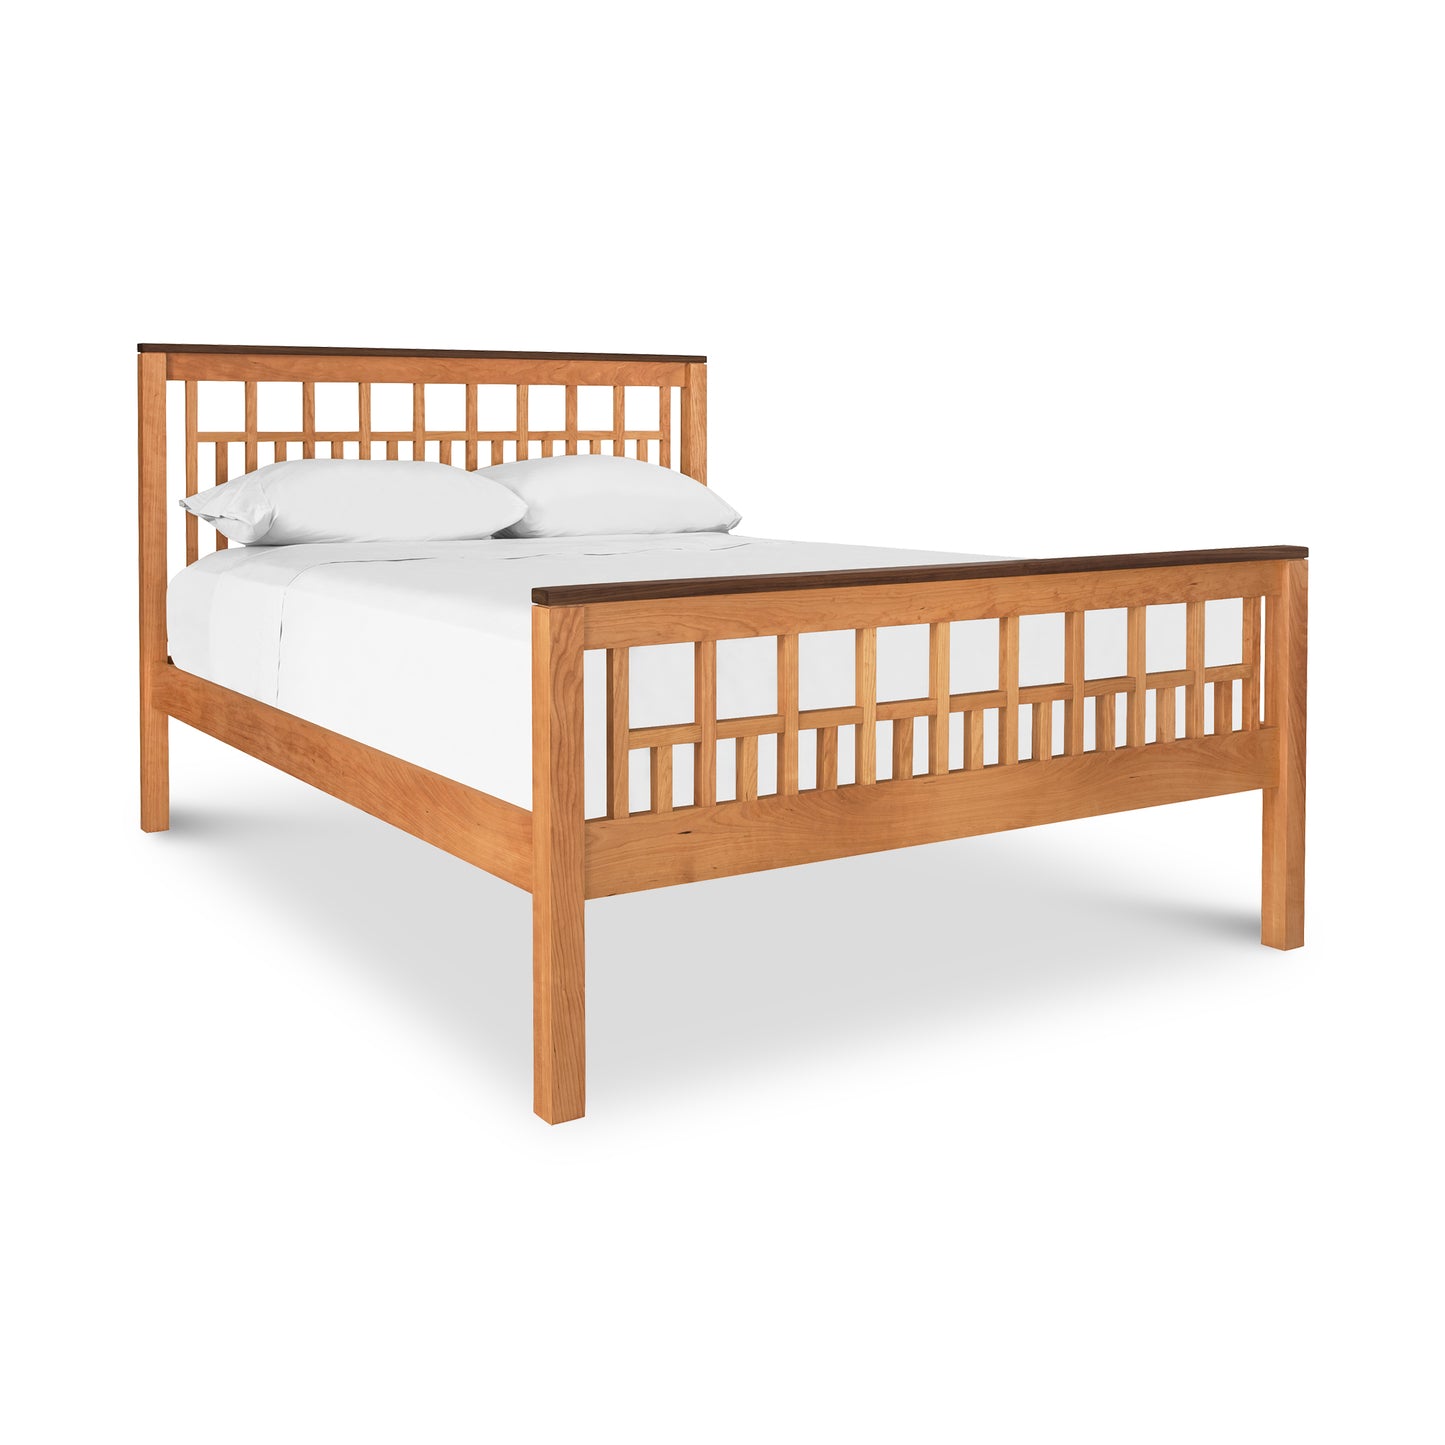 A Modern American Trellis Bed from Vermont Furniture Designs with a walnut wood bed frame and a wooden headboard and footboard.